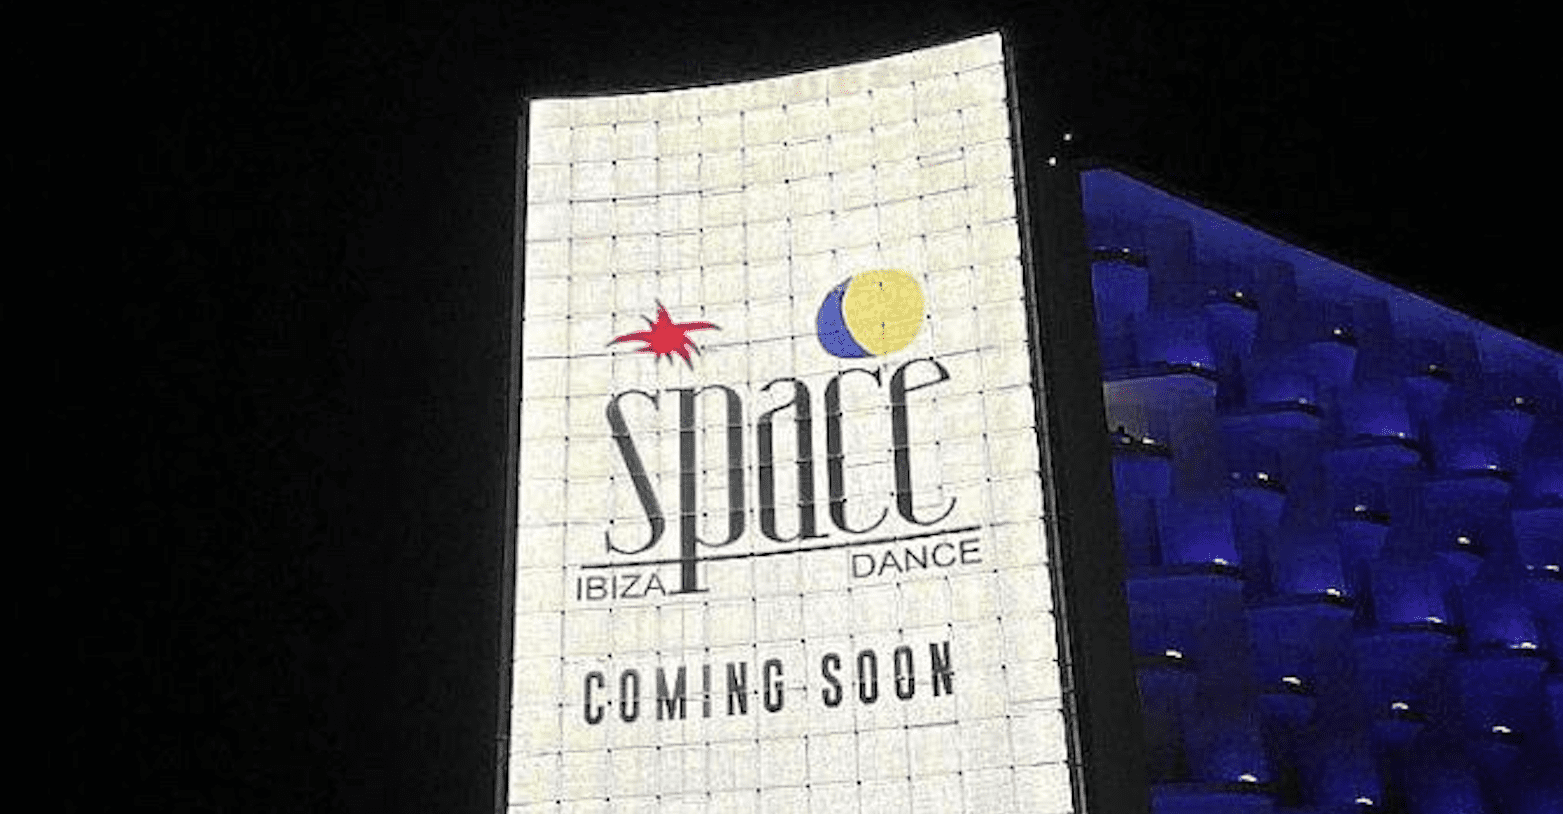 A new Space billboard has surfaced in Ibiza following reports of its return